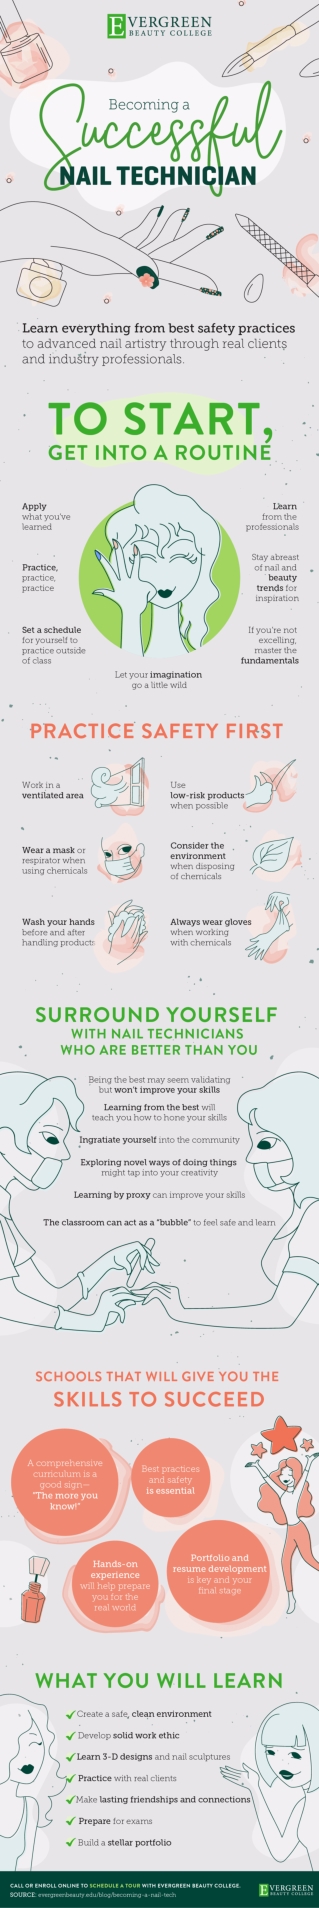 Becoming a Successful Nail Technician